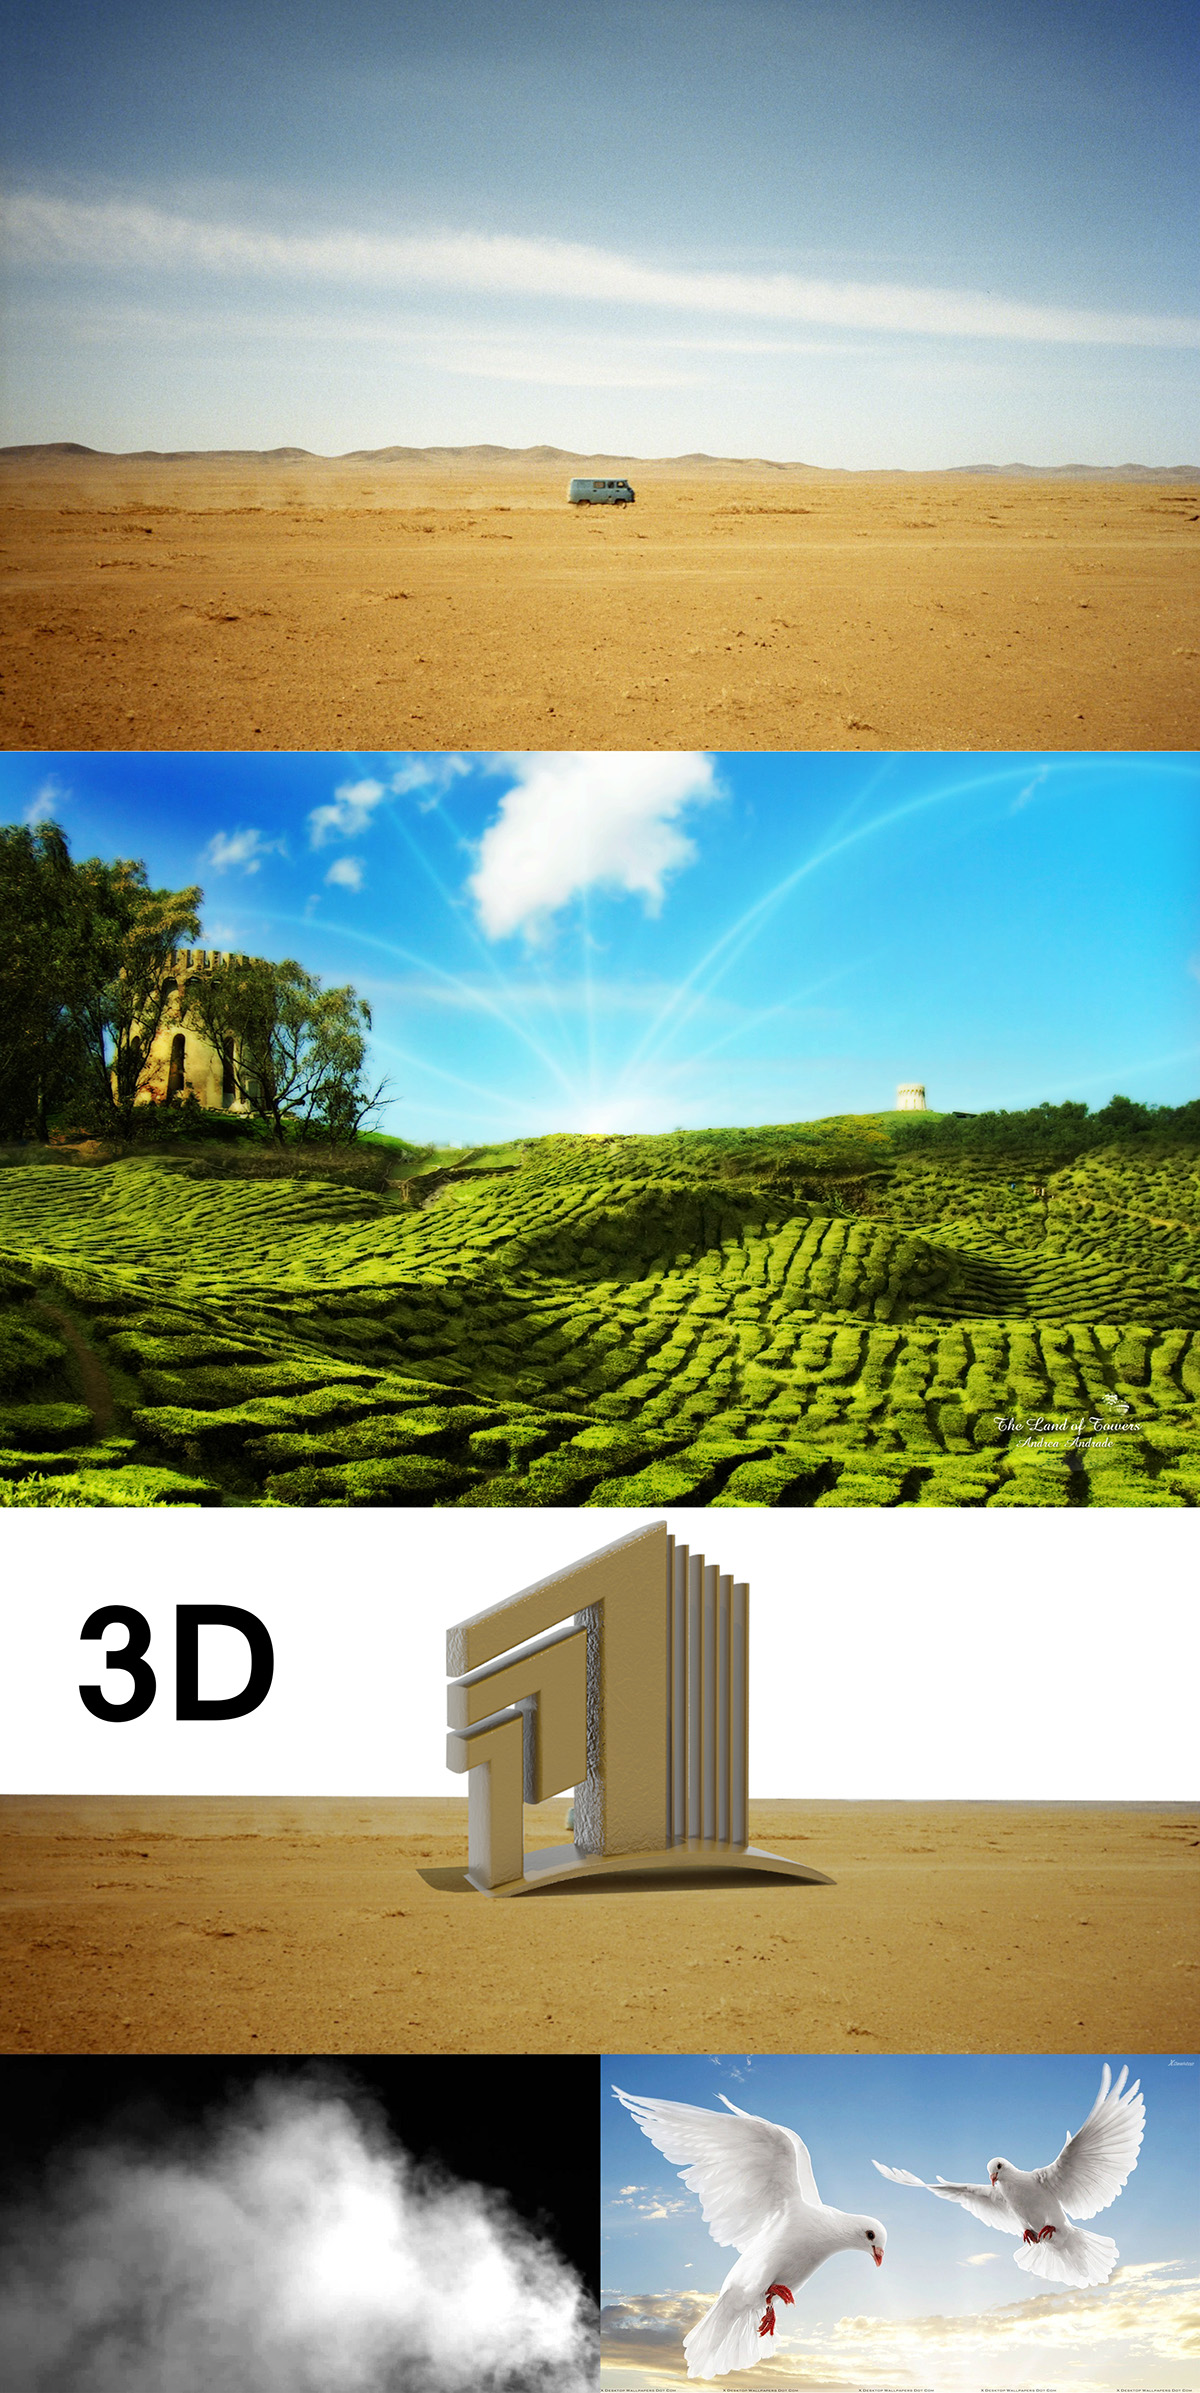 general contracting 3D photoshop